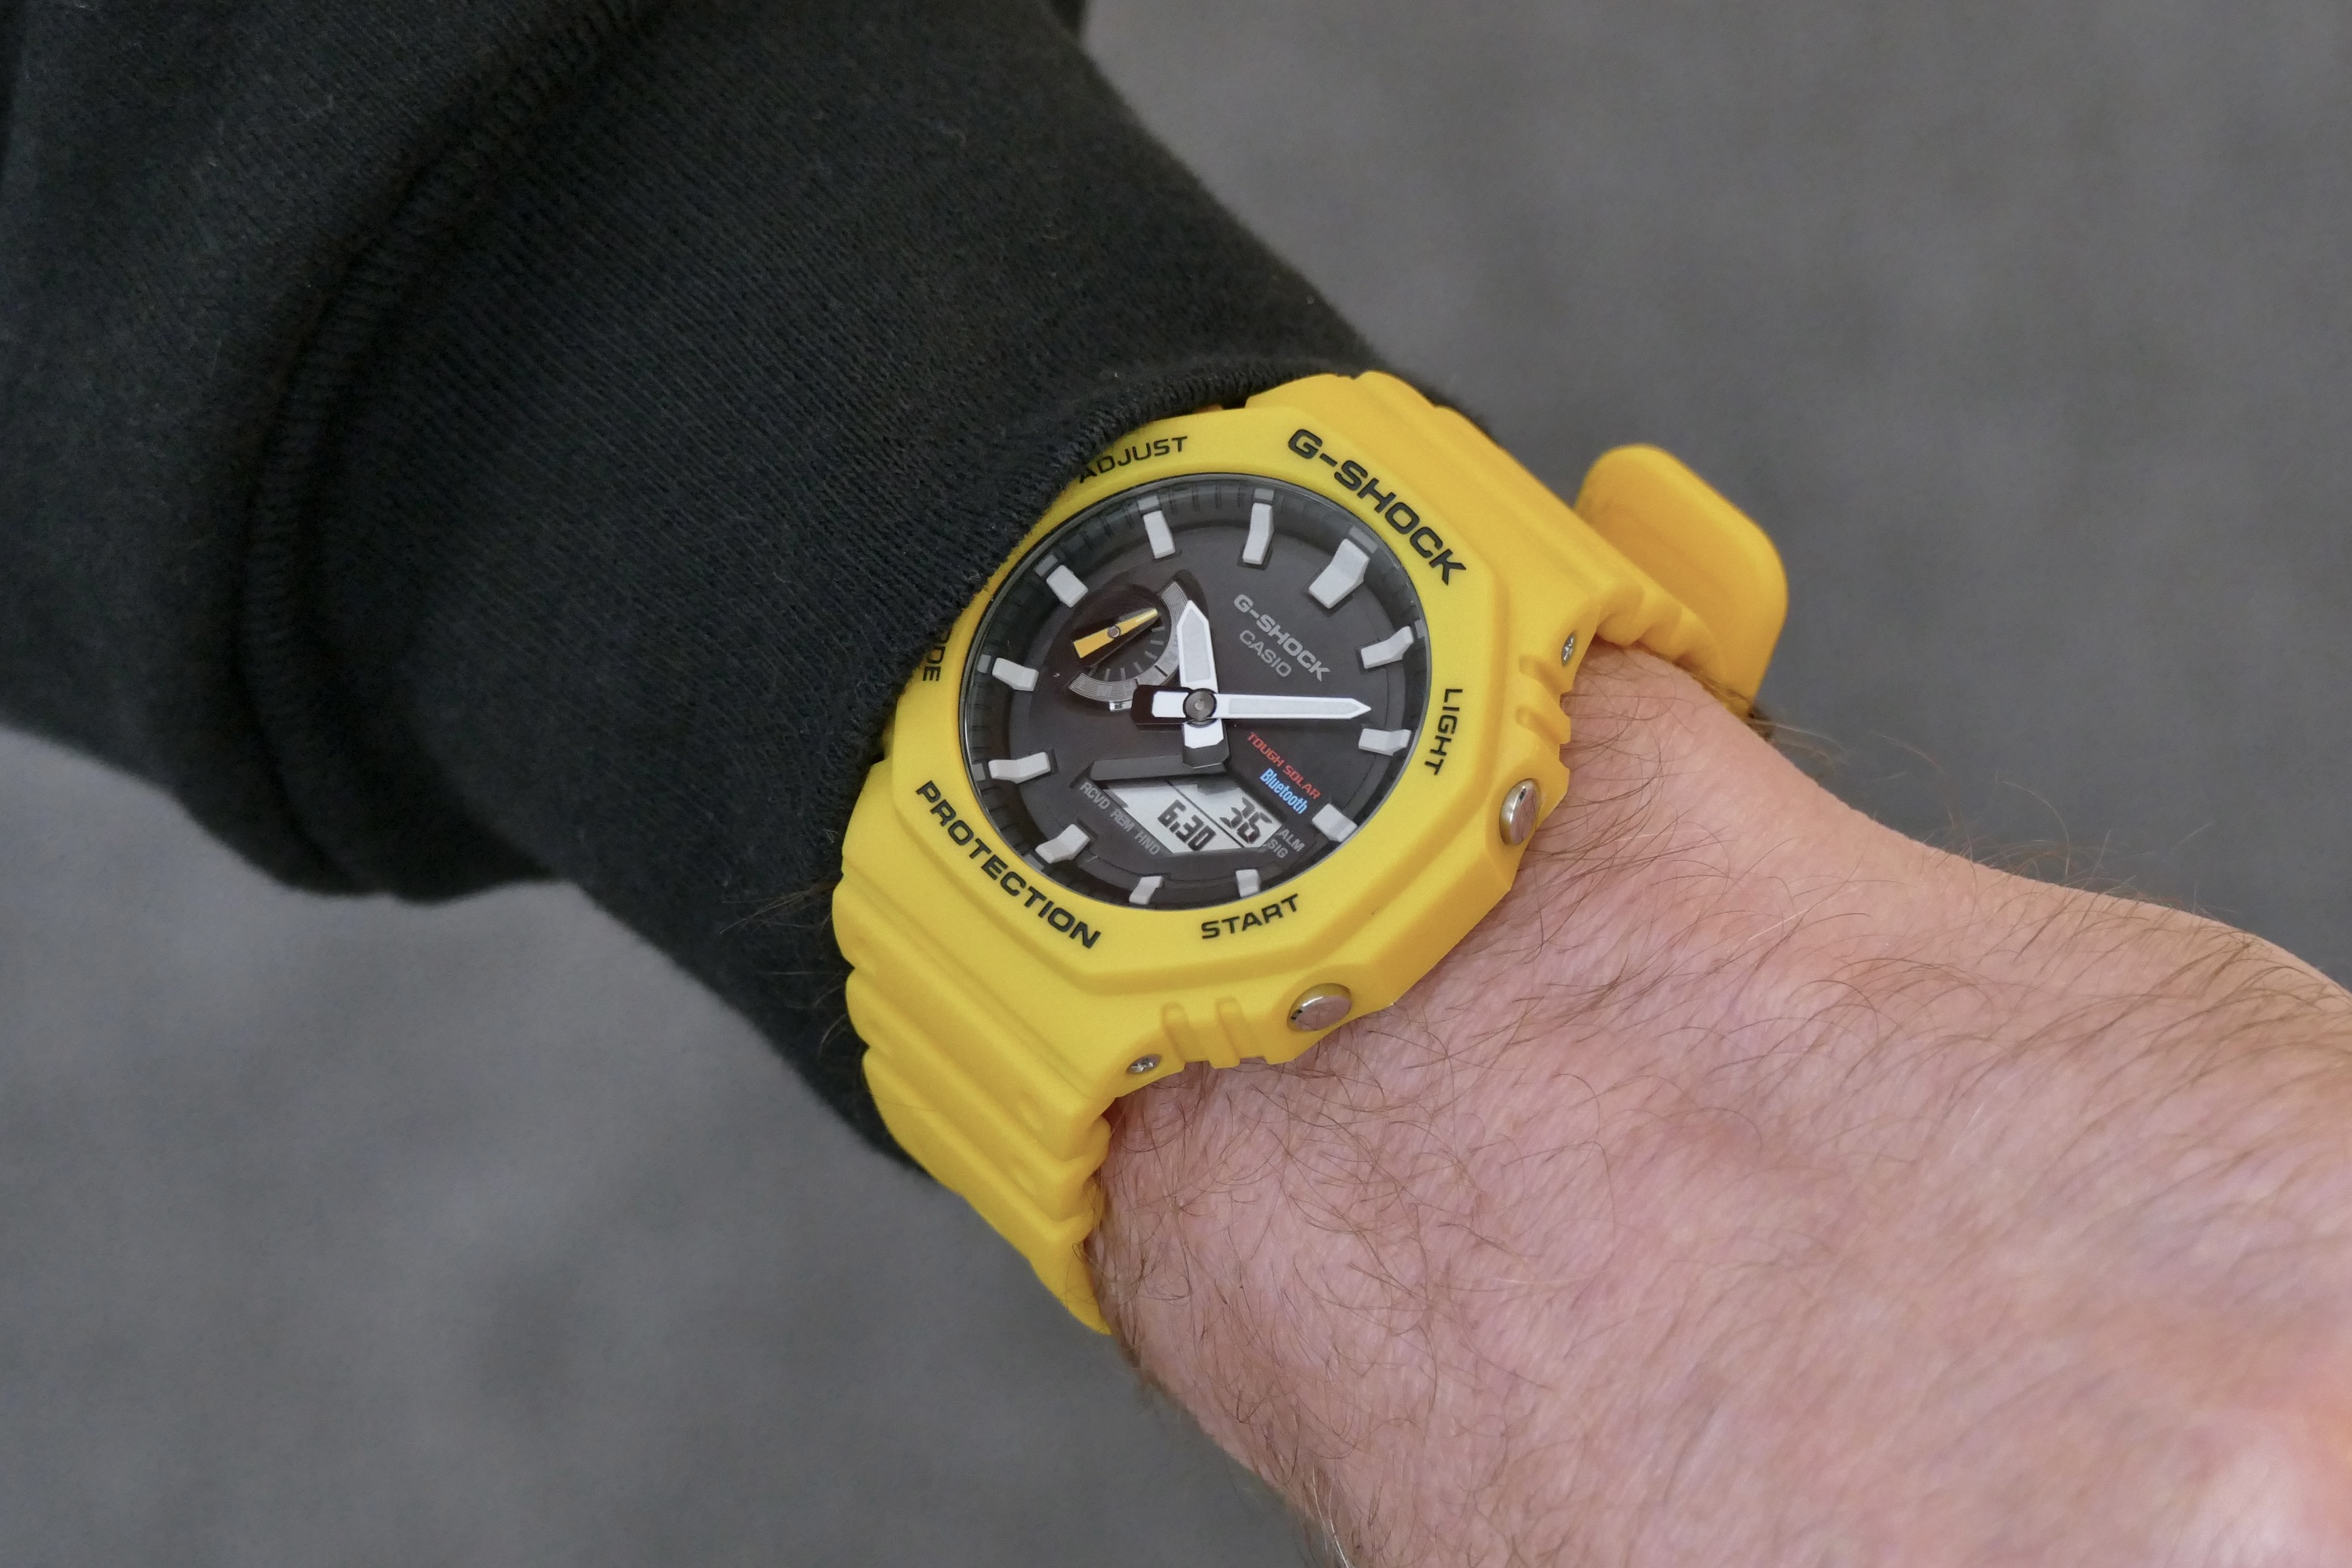 great | a watch Digital buy GA-B2100 G-Shock is tech-boosted The Trends